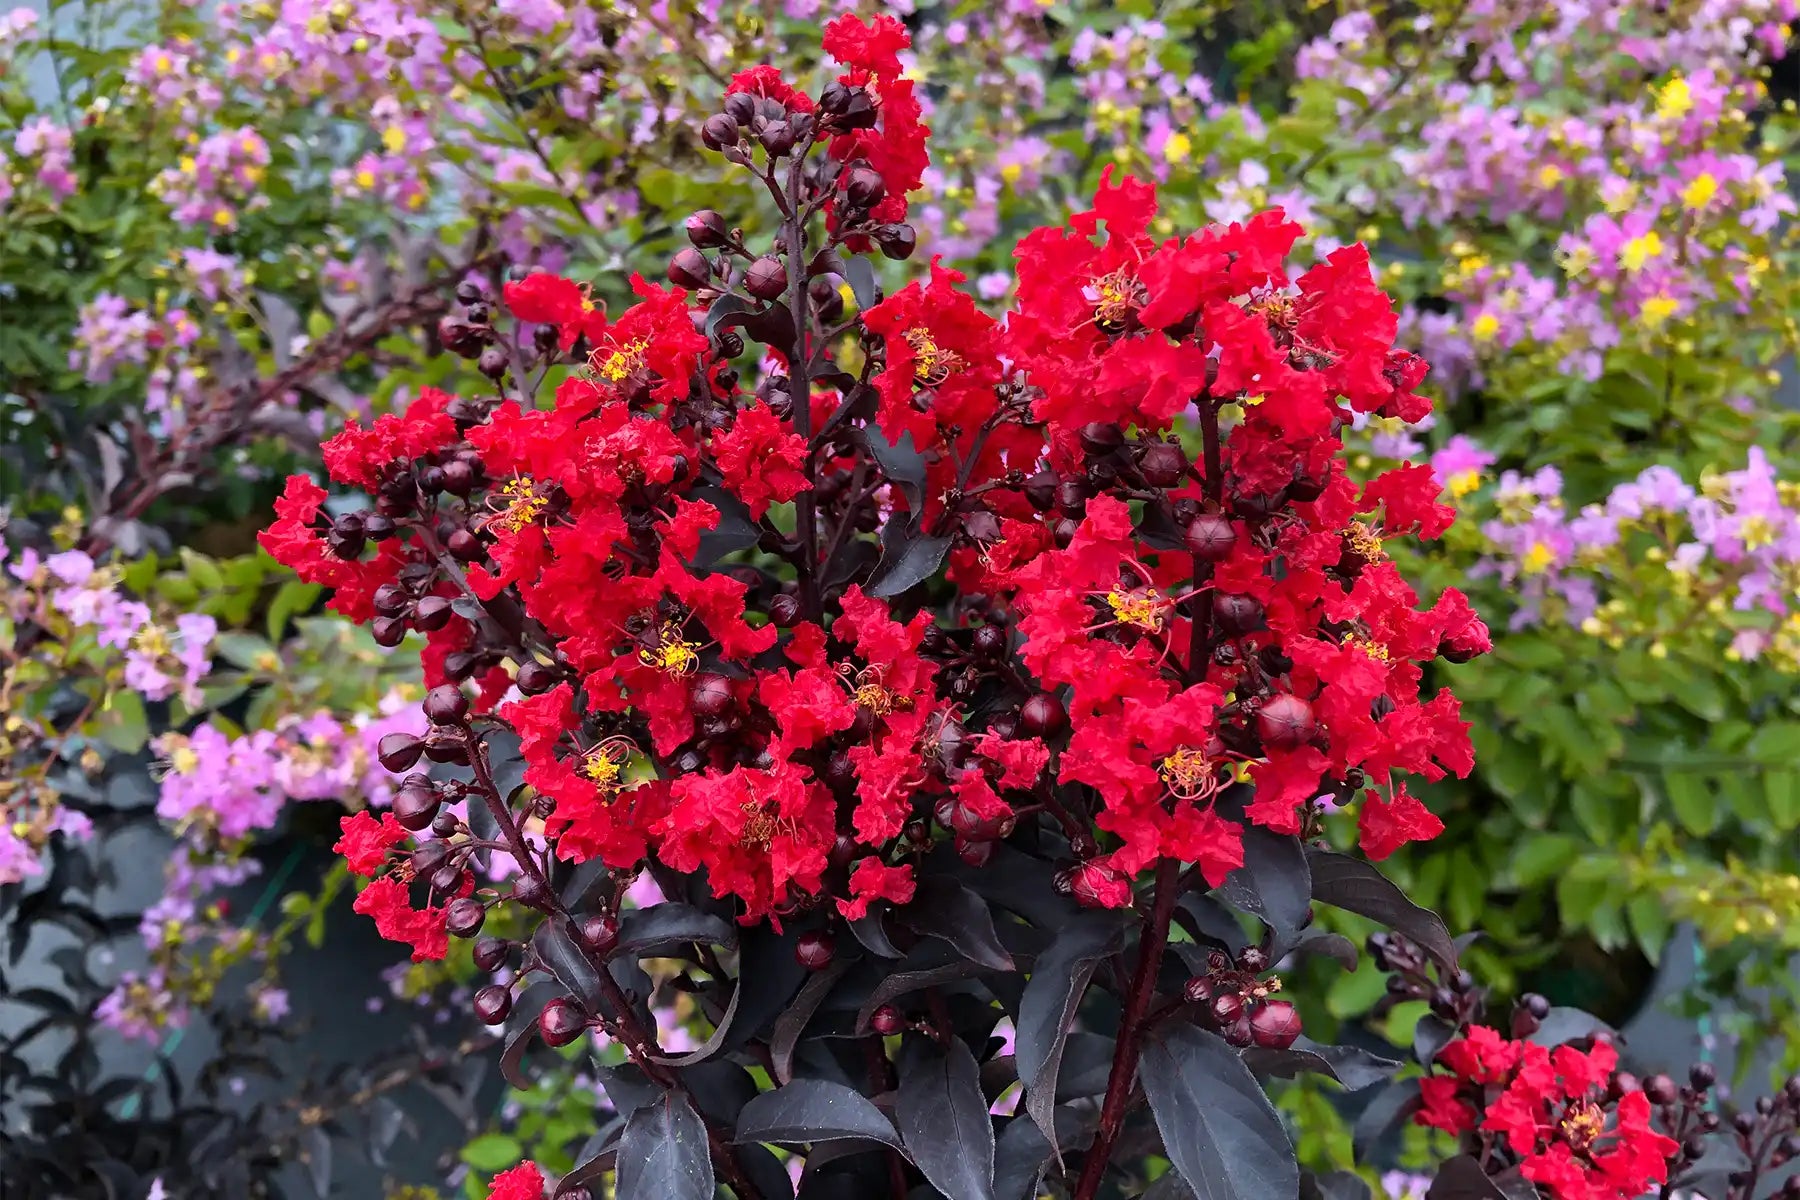 Crepe Myrtle blooms in masse with striking red blossoms that will soon give way to the purple buds waiting  to bloom. Both are complemented by almost black, dark purple leaves.